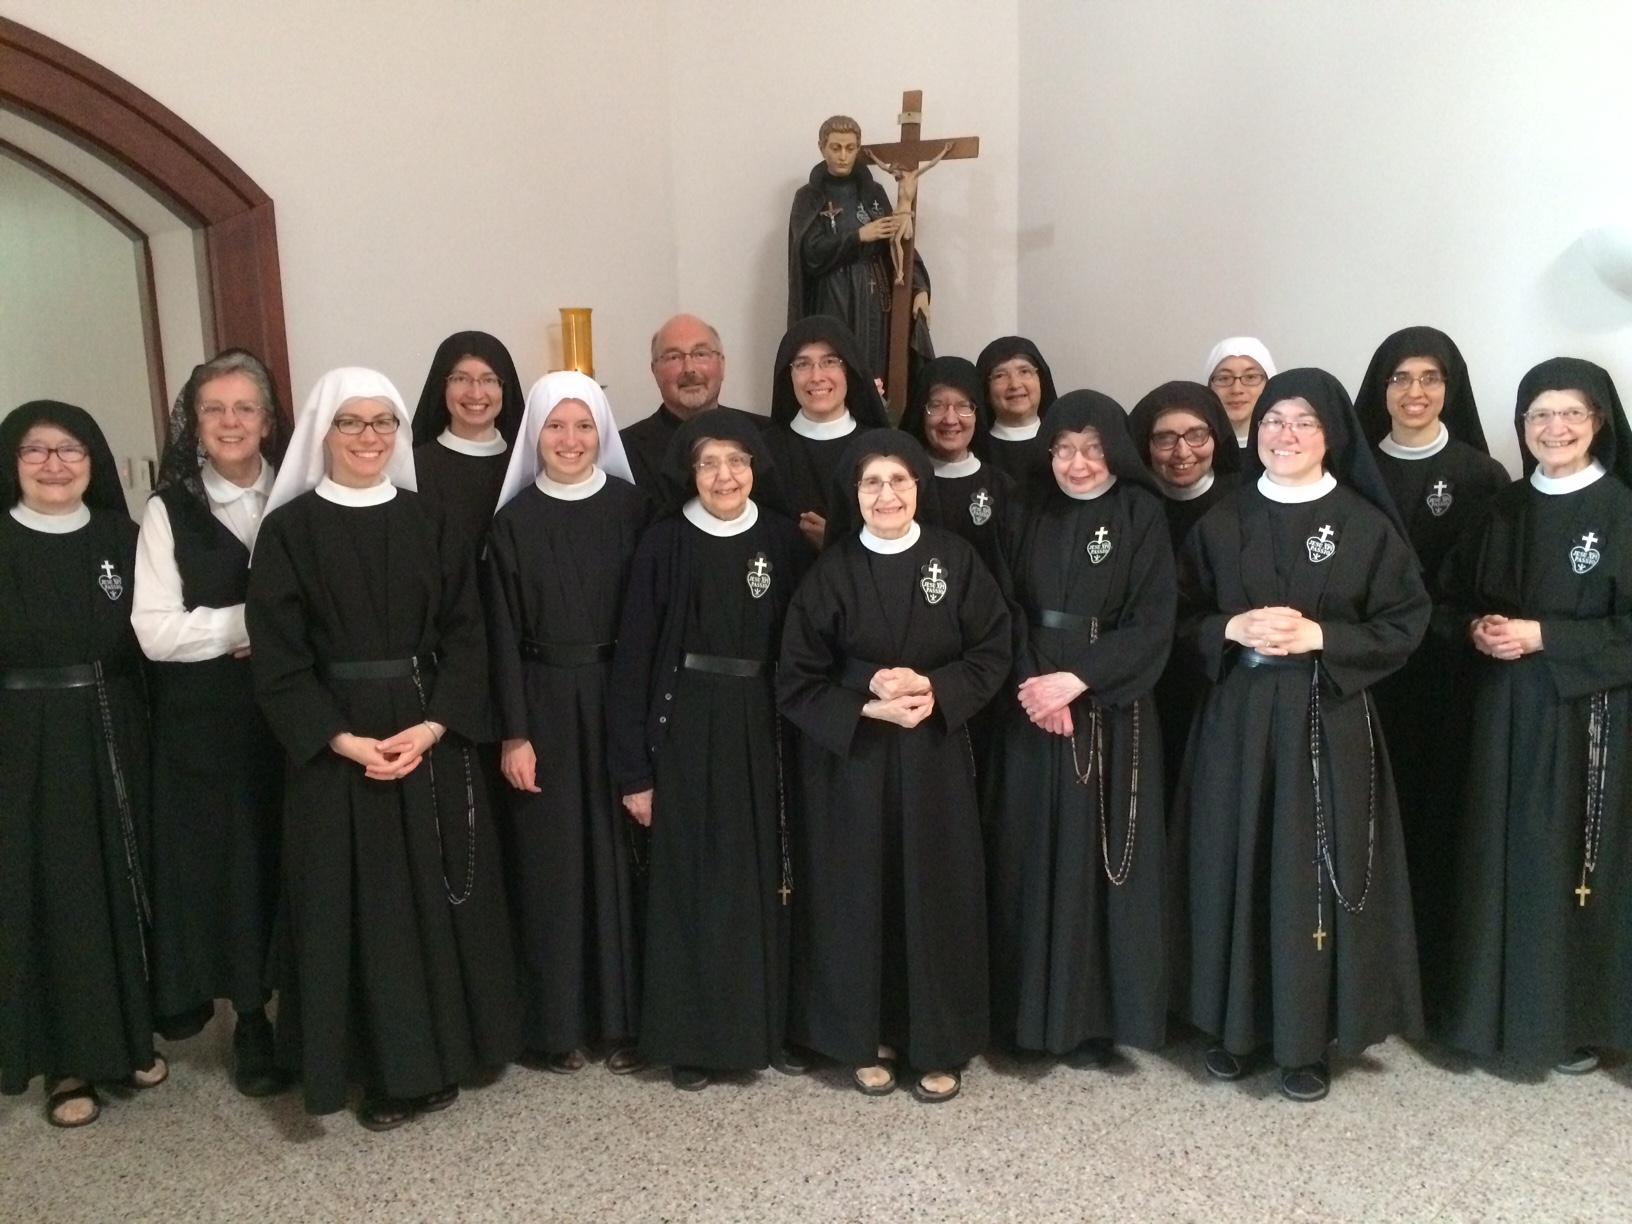 The Passionist Community of St. Joseph's Monastery/Supplied image